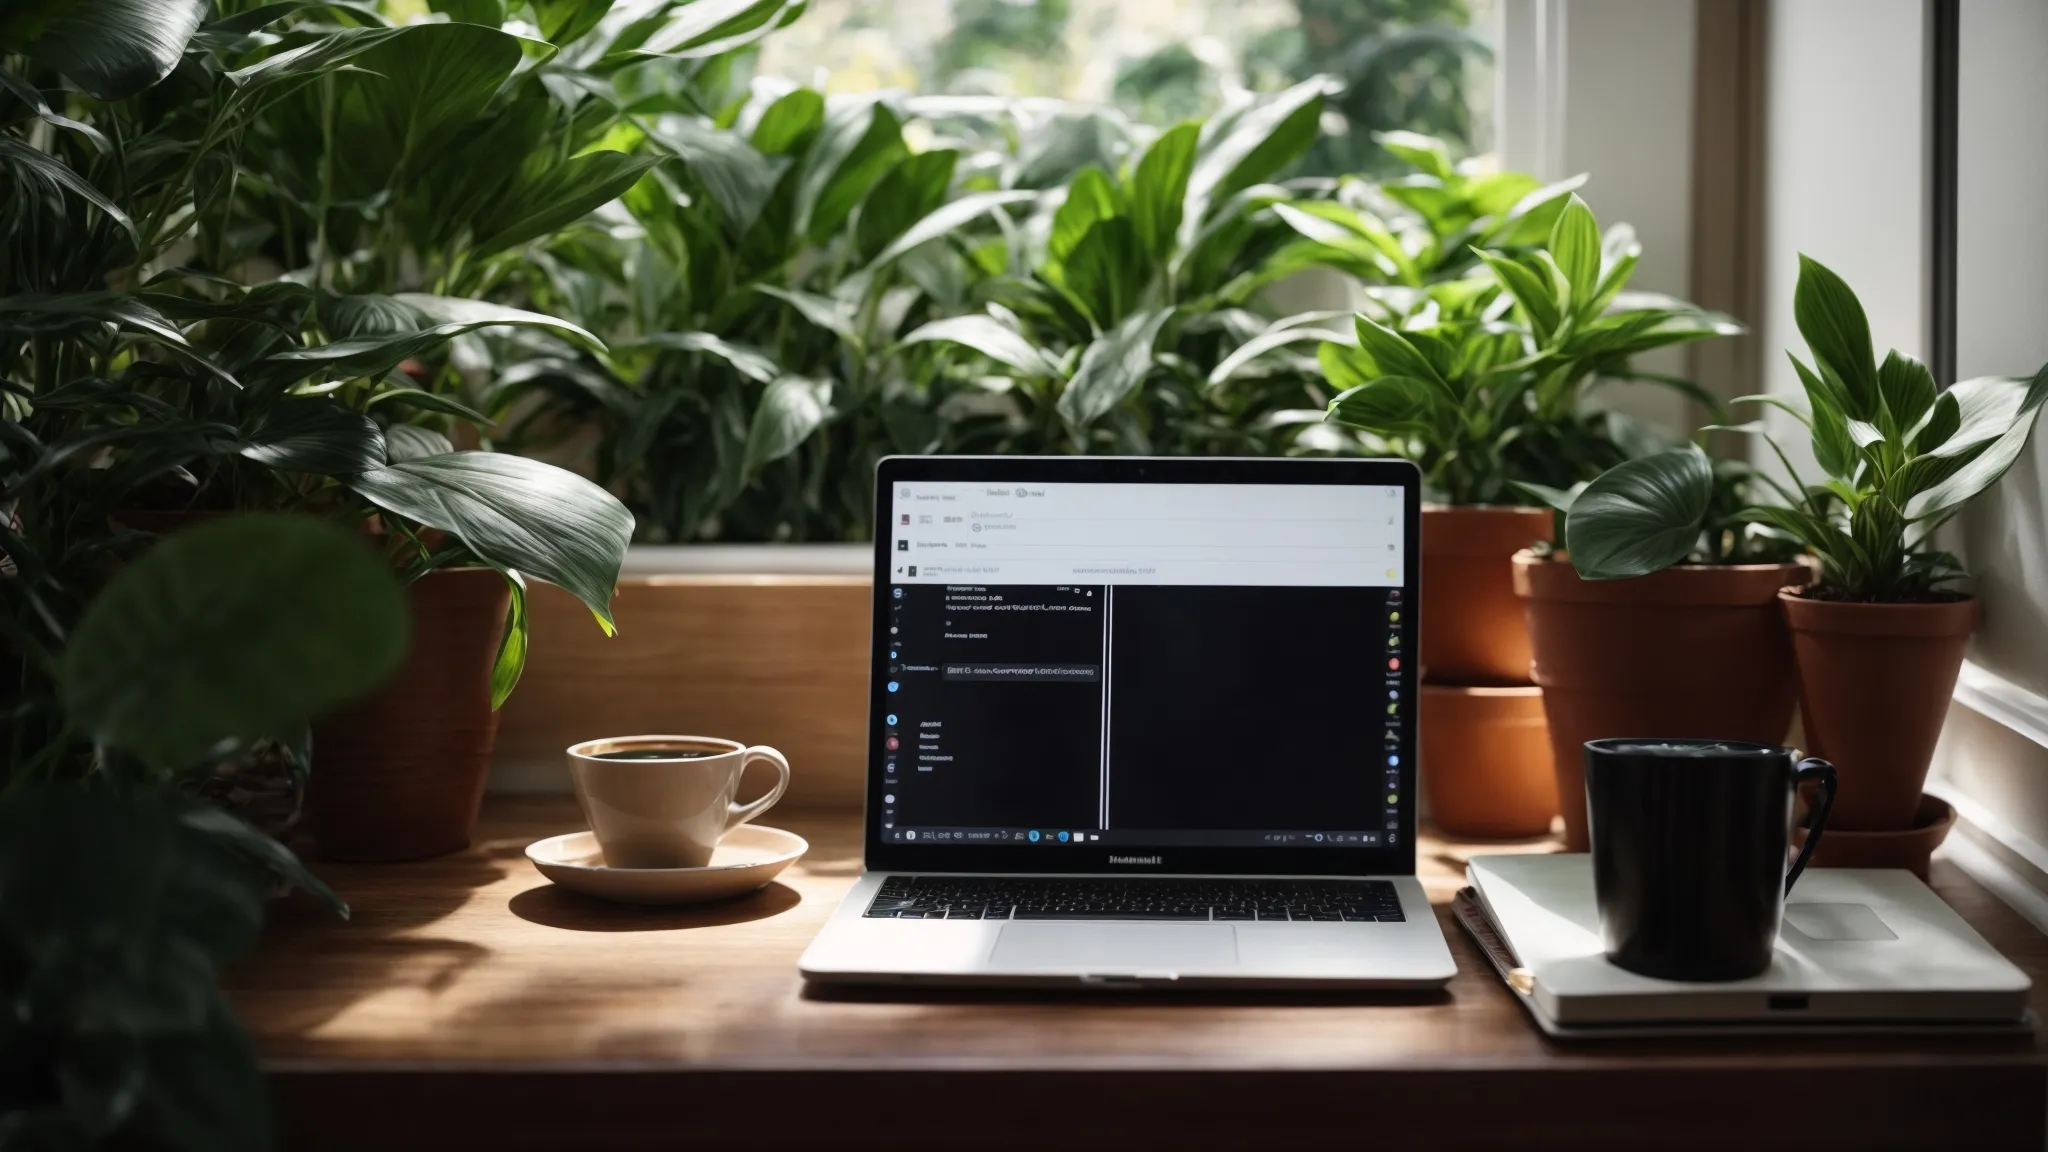 a laptop, notepad, and a cup of coffee on a wooden desk, surrounded by houseplants in a bright workspace.